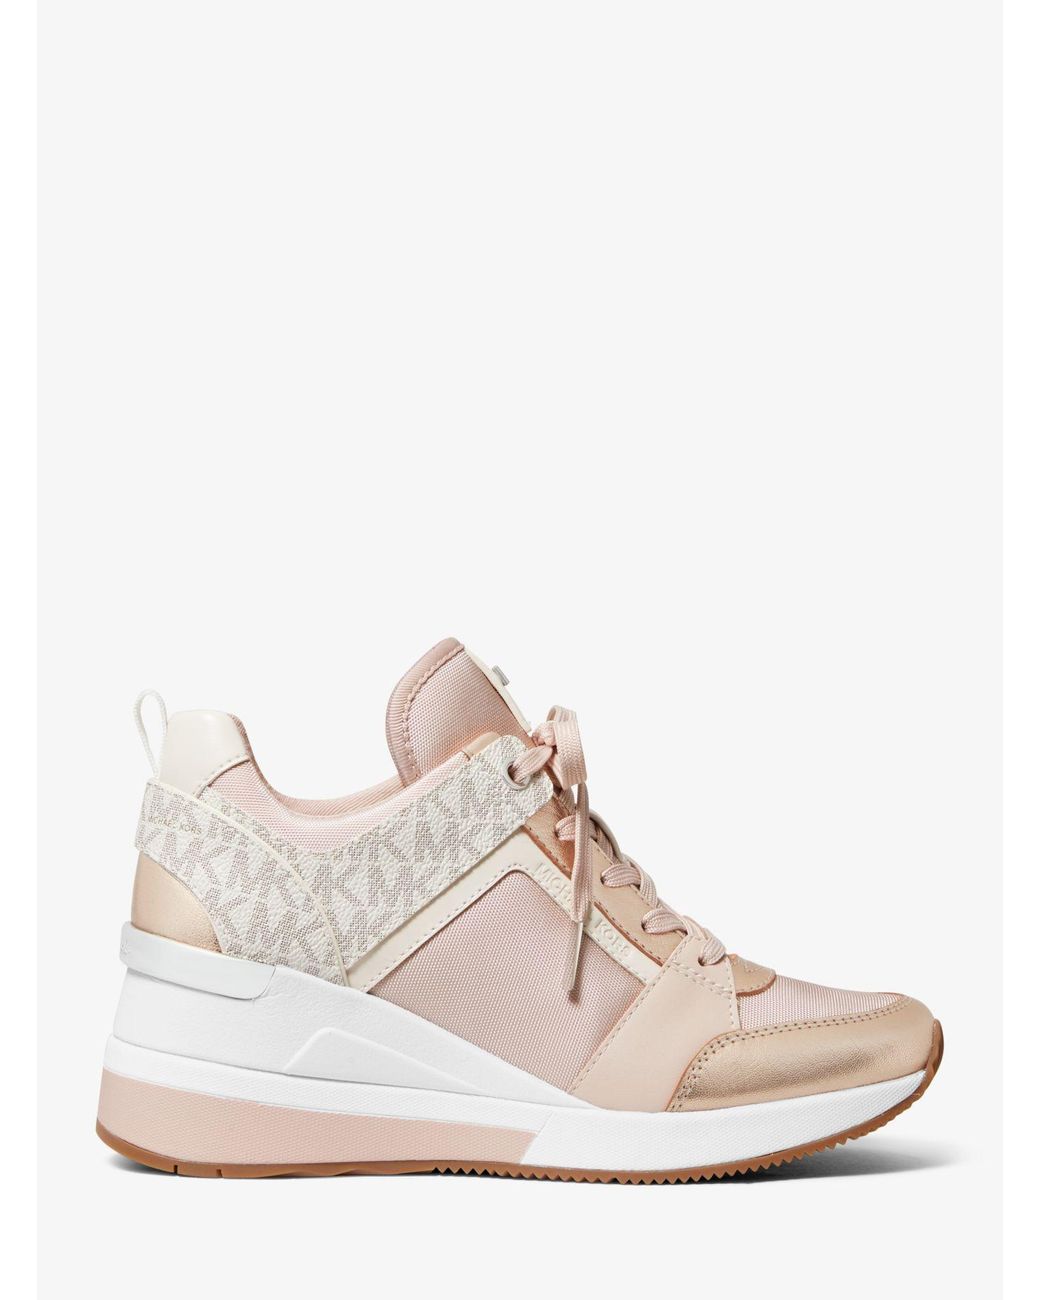 Michael Kors Georgie Leather And Logo Trainer in Pink | Lyst